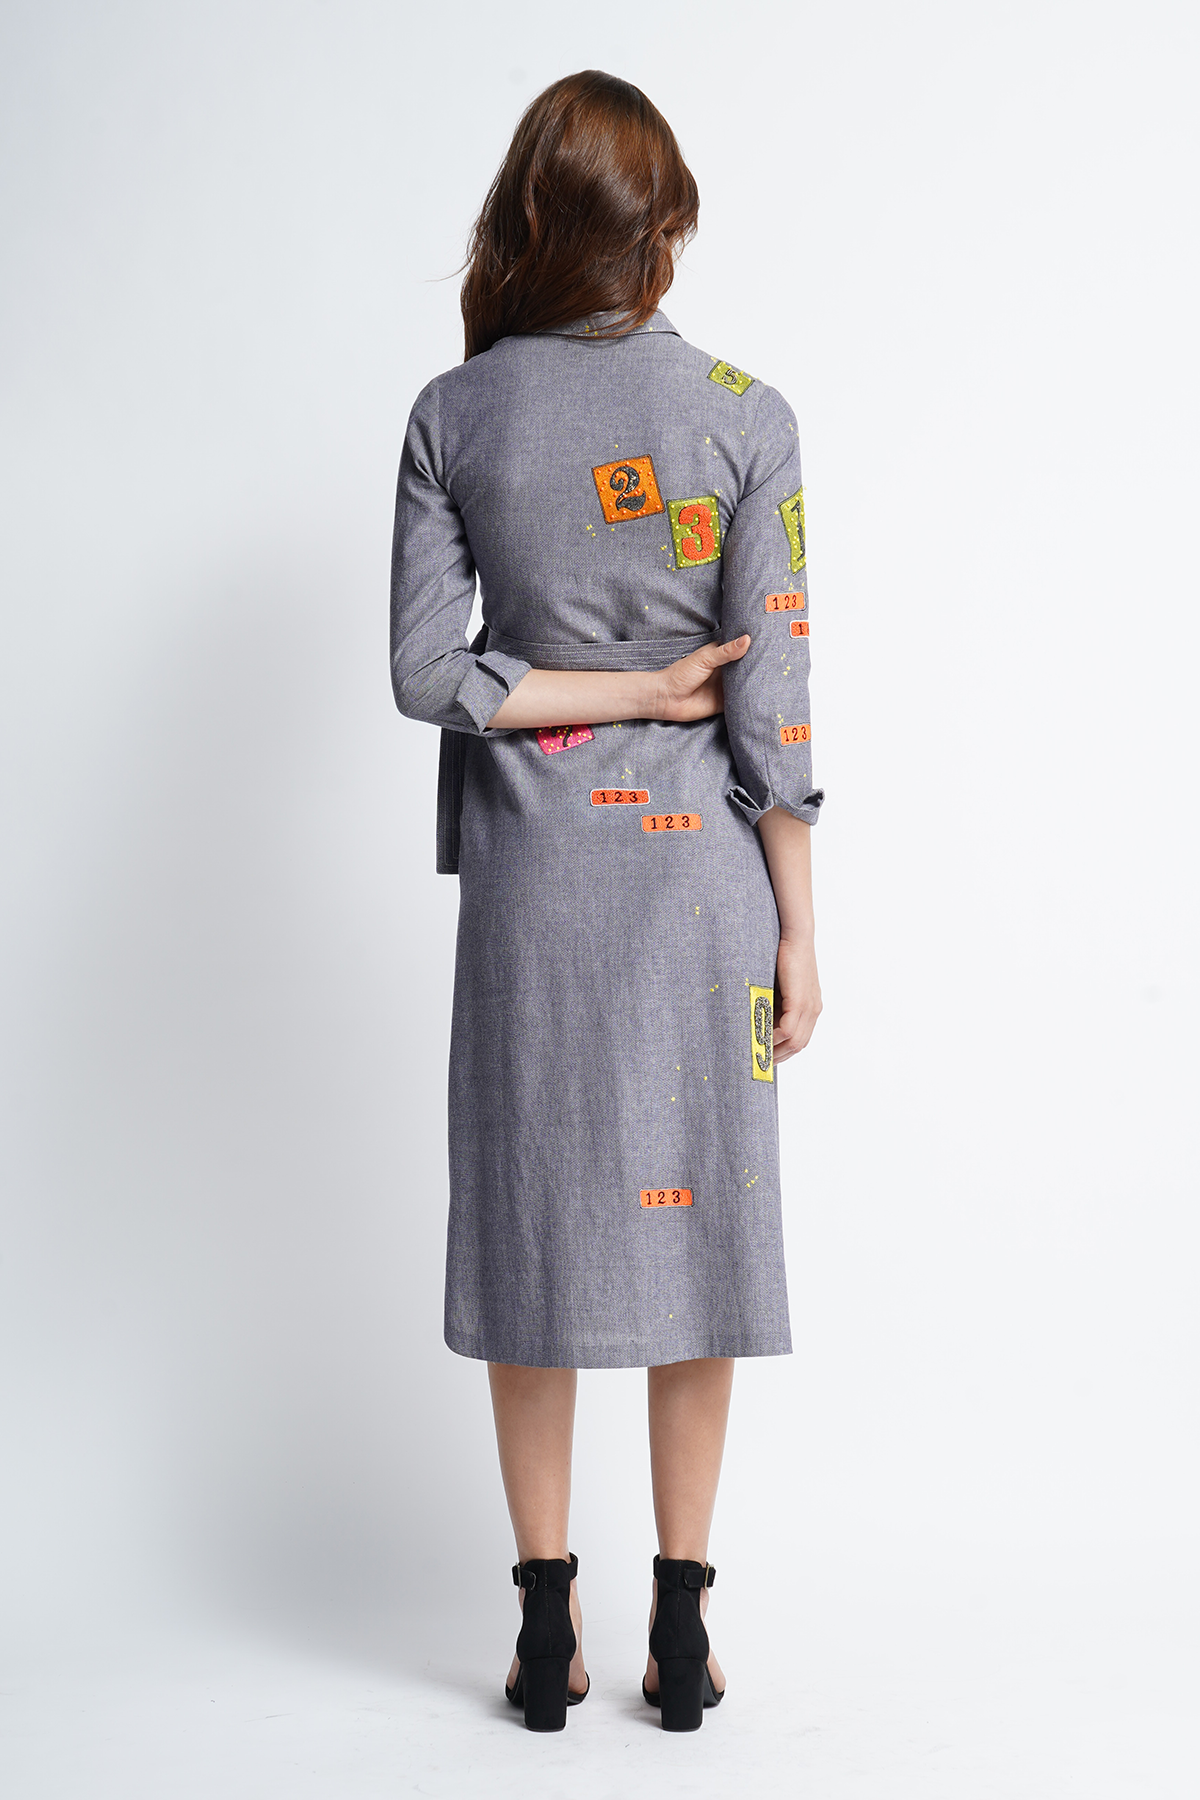 Odd And Even Numbers Long Shirt Dress With Buckle Belt